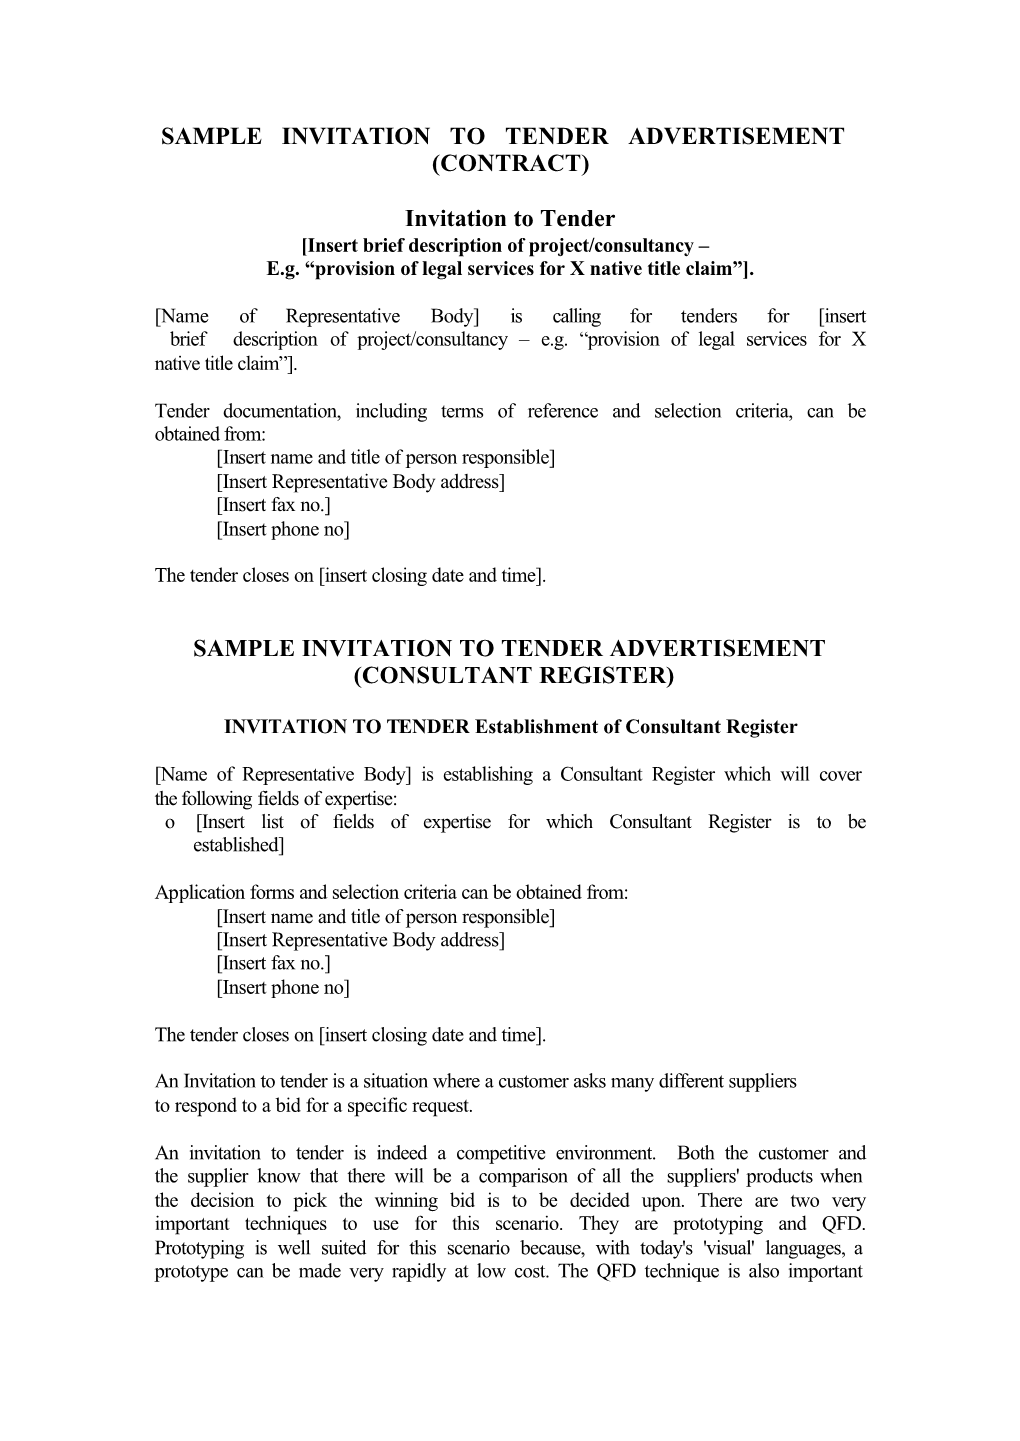 Sample Invitation to Tender Advertisement (Contract)